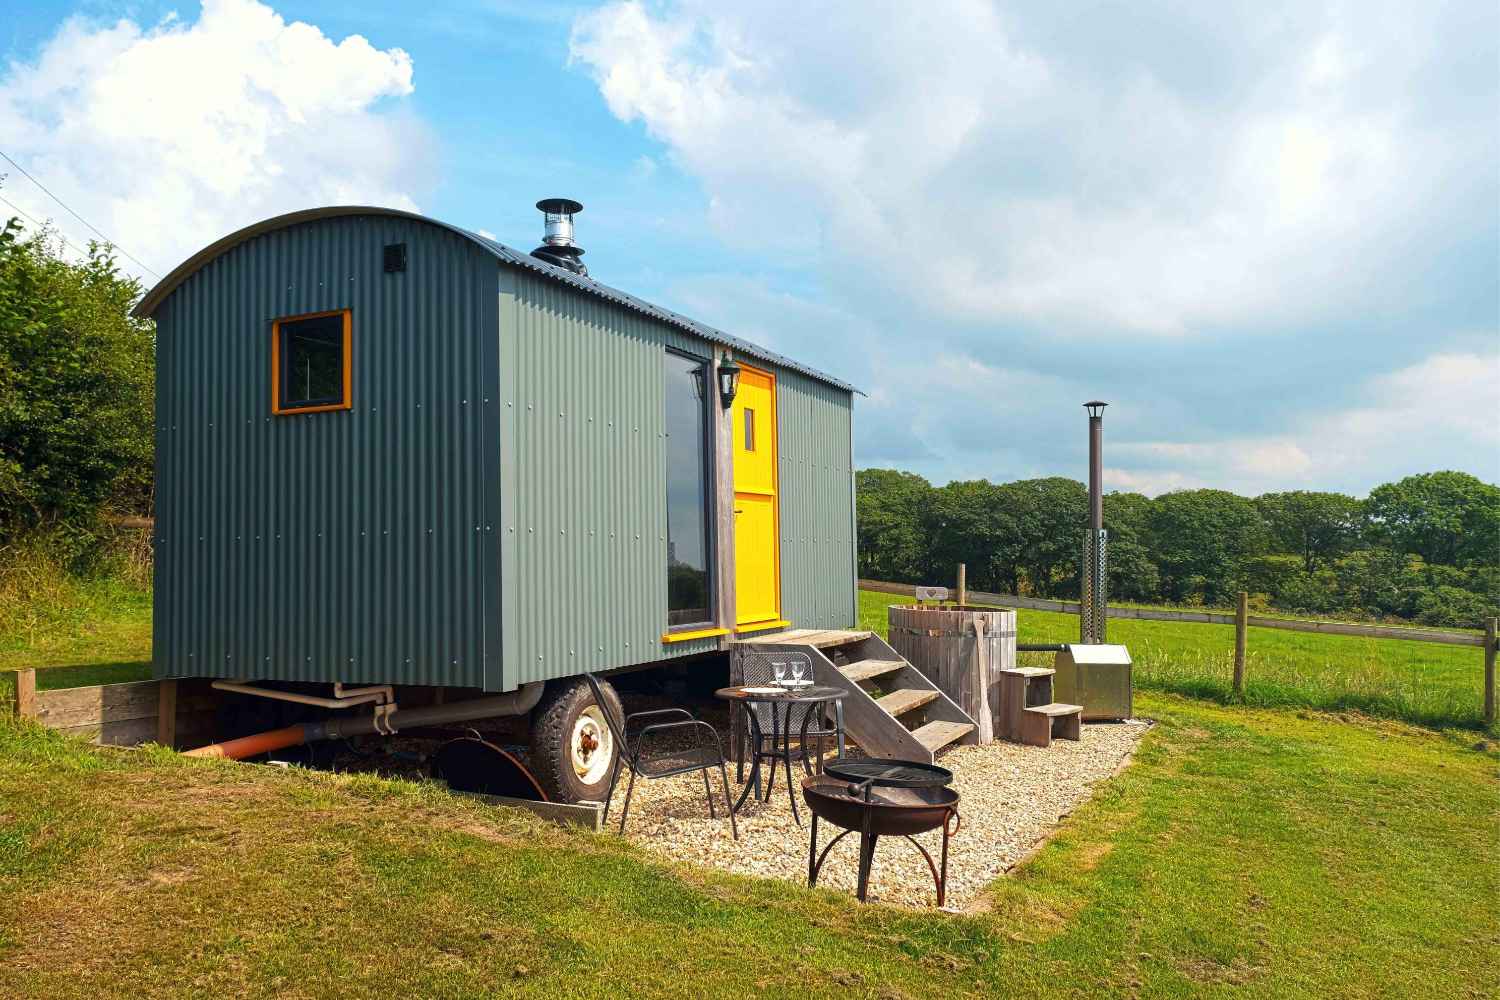 mint-big-cwtch-shepherds-hut-with-yellow-door-in-field-glamping-south-wales